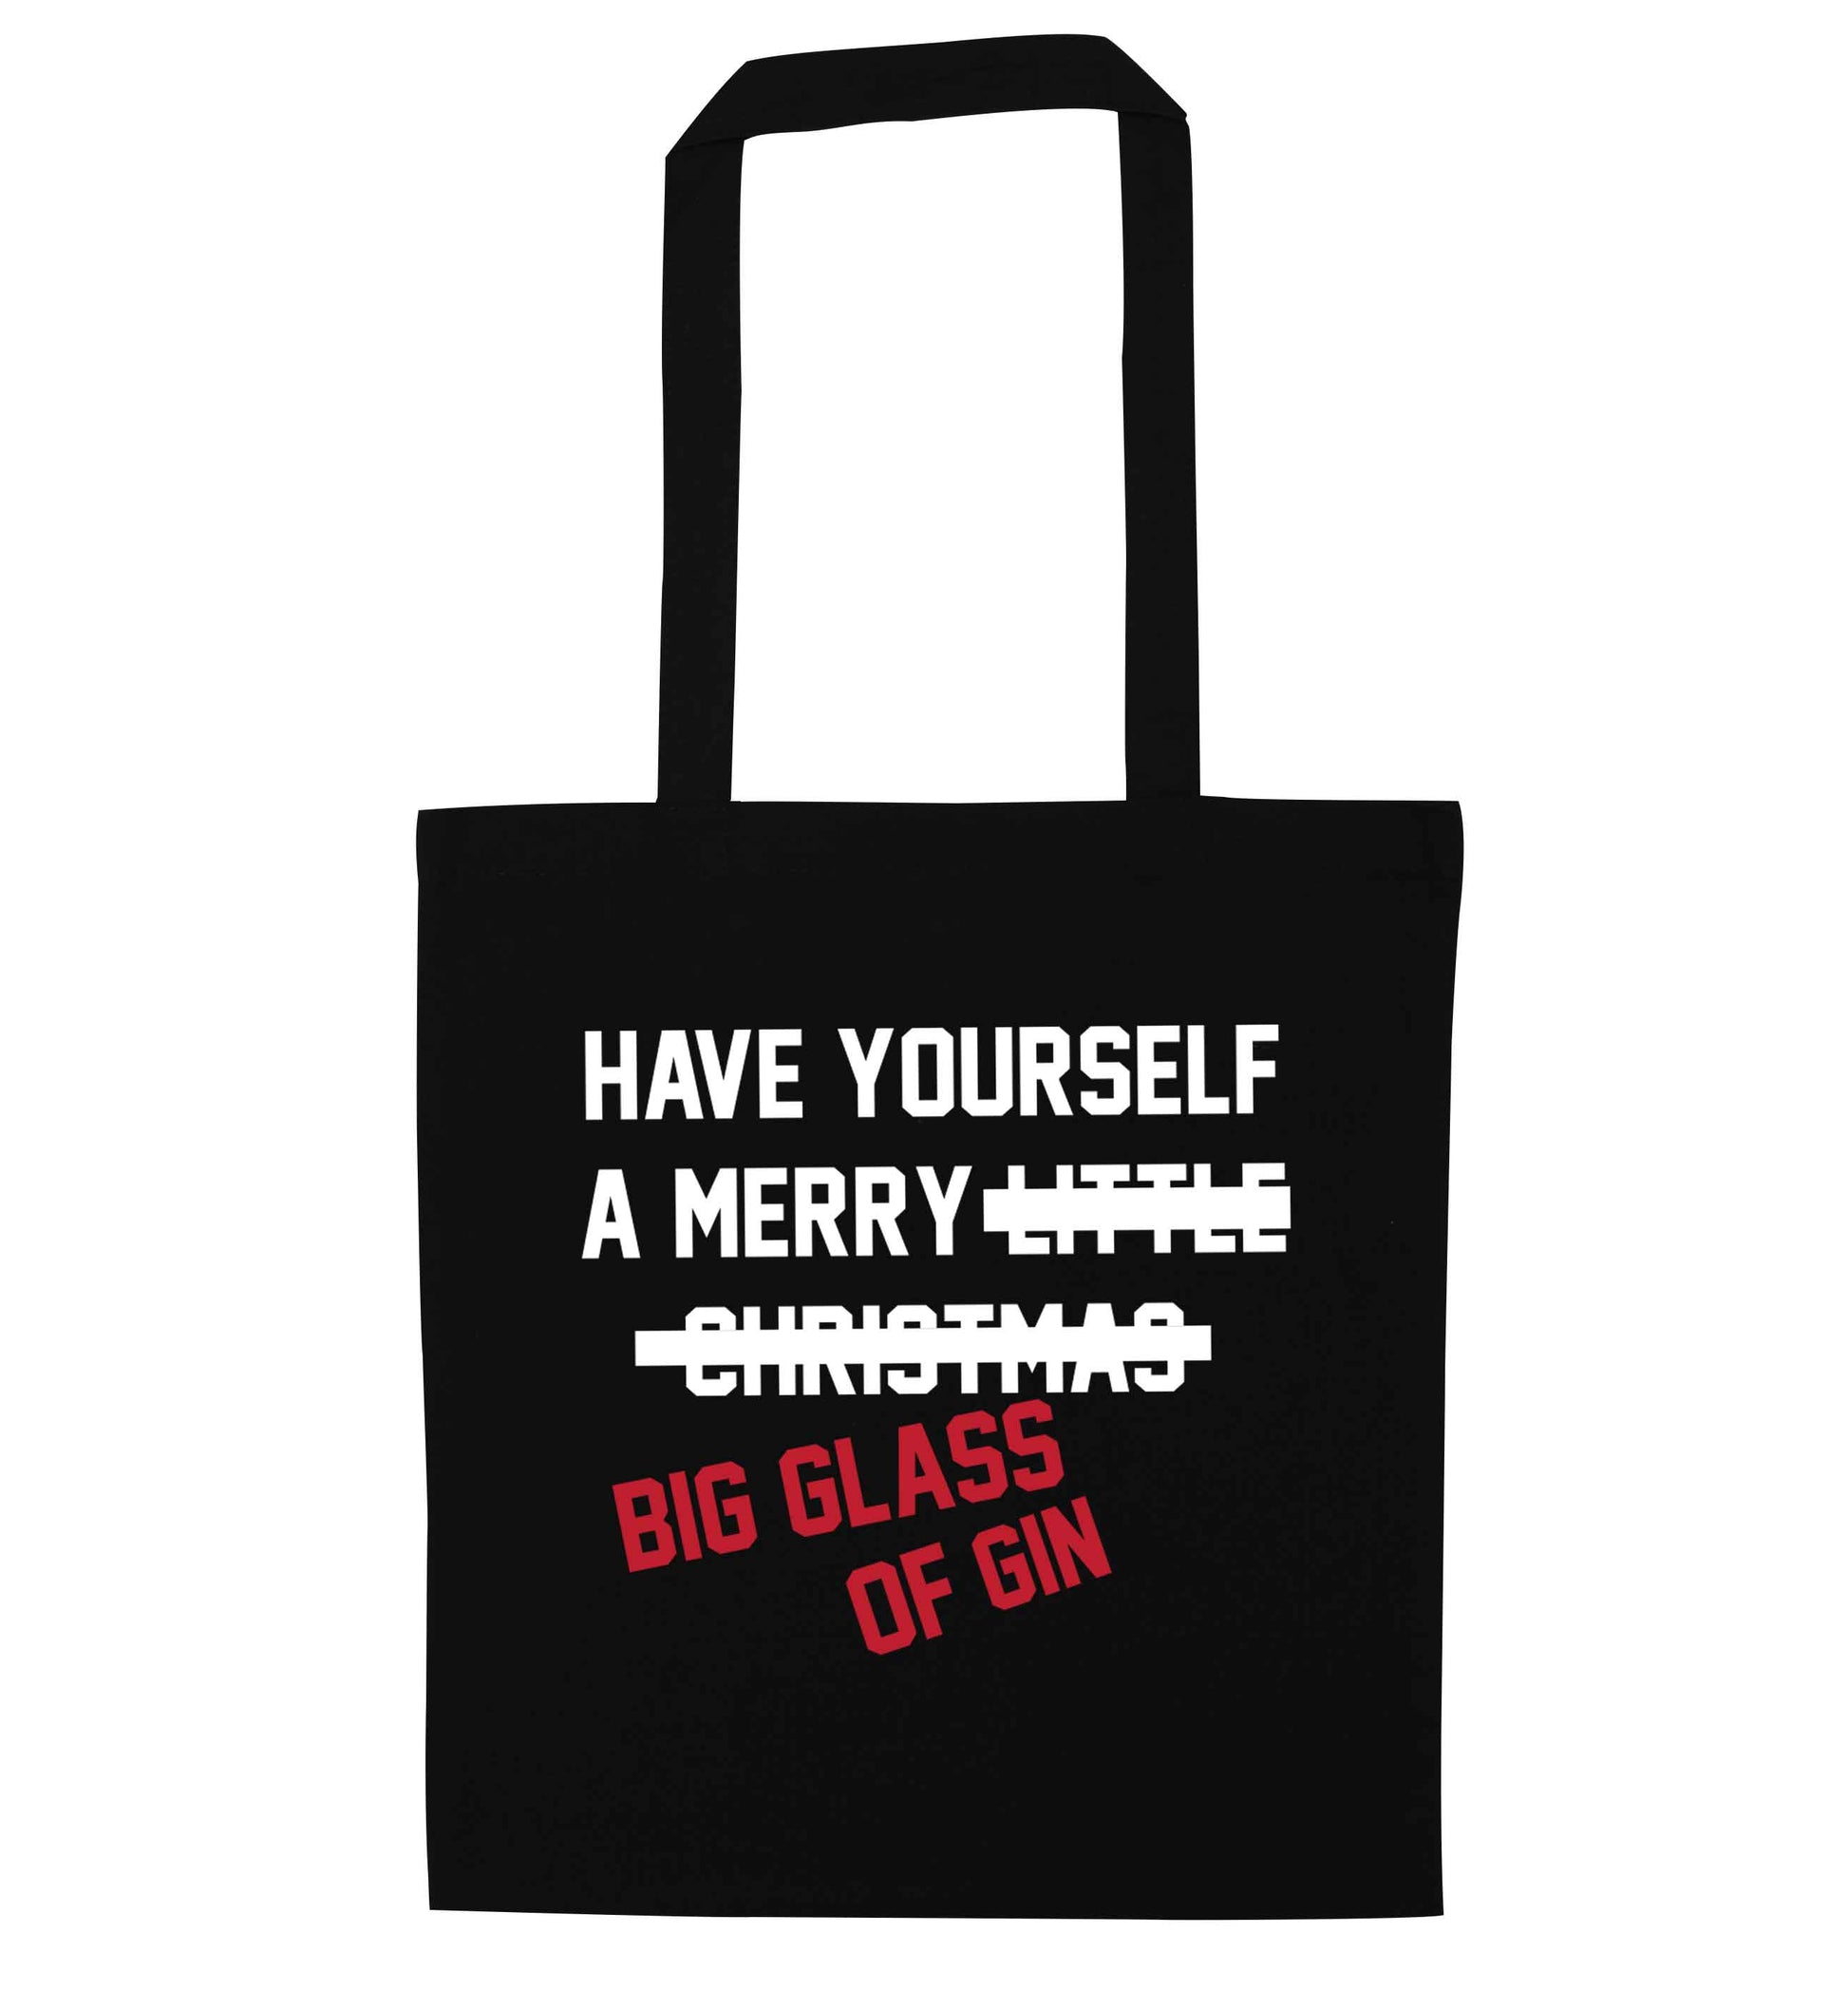 Have yourself a merry big glass of gin black tote bag